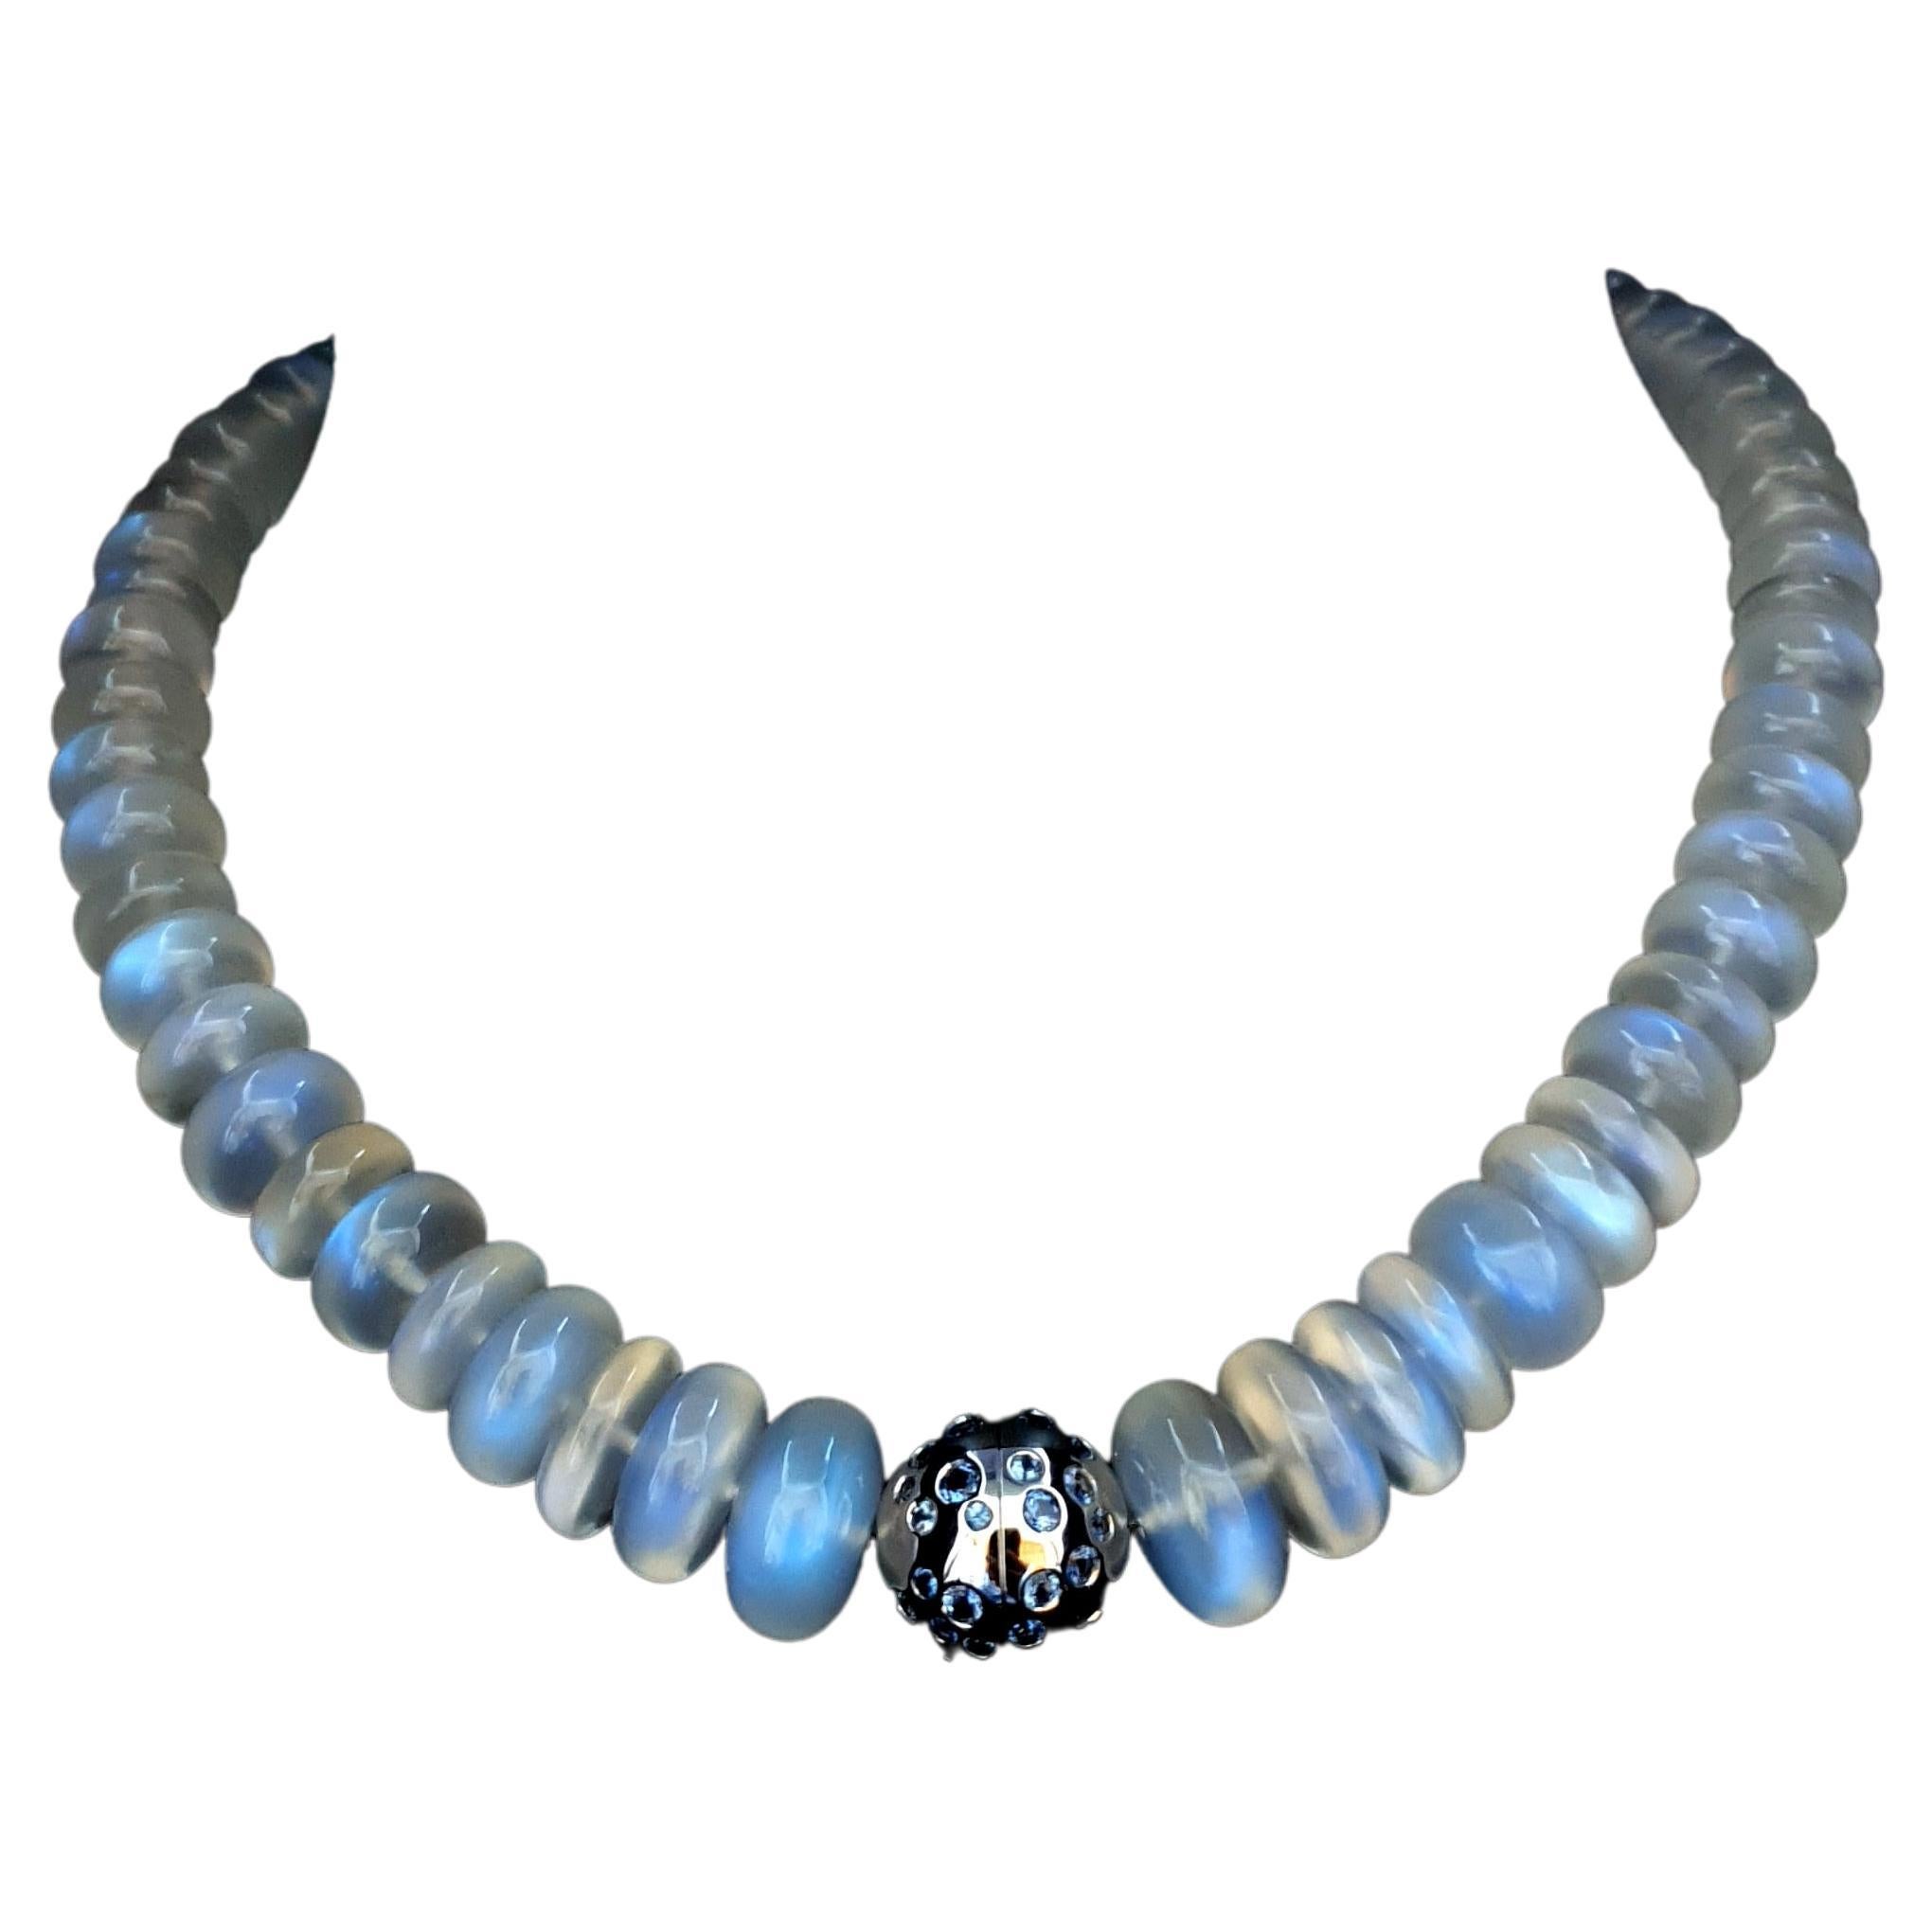 Blue Moonstone Rondel Beaded Necklace with 18 Carat White Gold Sapphire Clasp For Sale